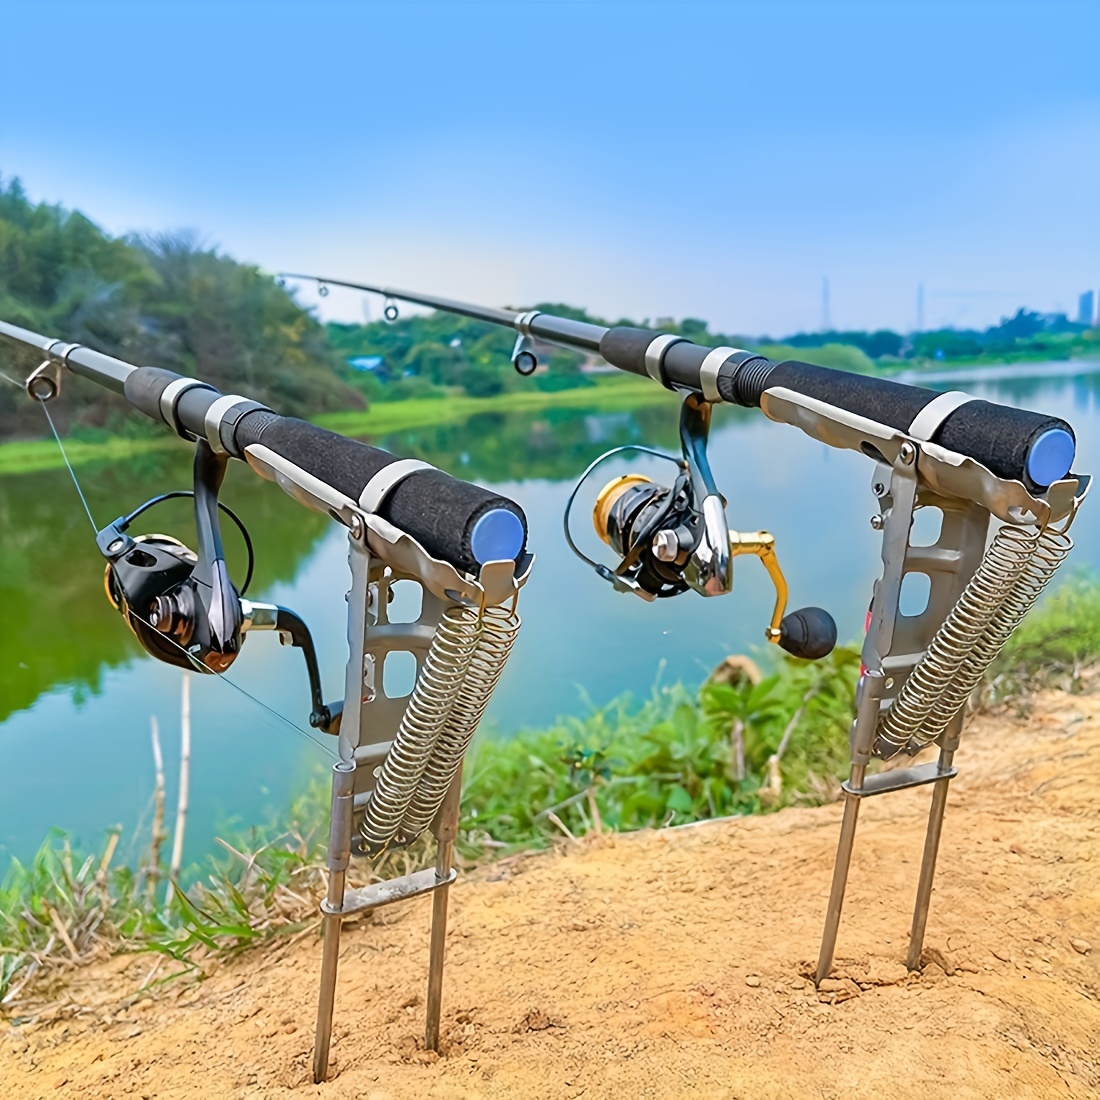 

1pc Auto-deploy Fishing Rod Holder - High Sensitivity, Dual Spring Activation - Ideal For Hands-free Ground Fishing, Stainless Steel Construction, Companion